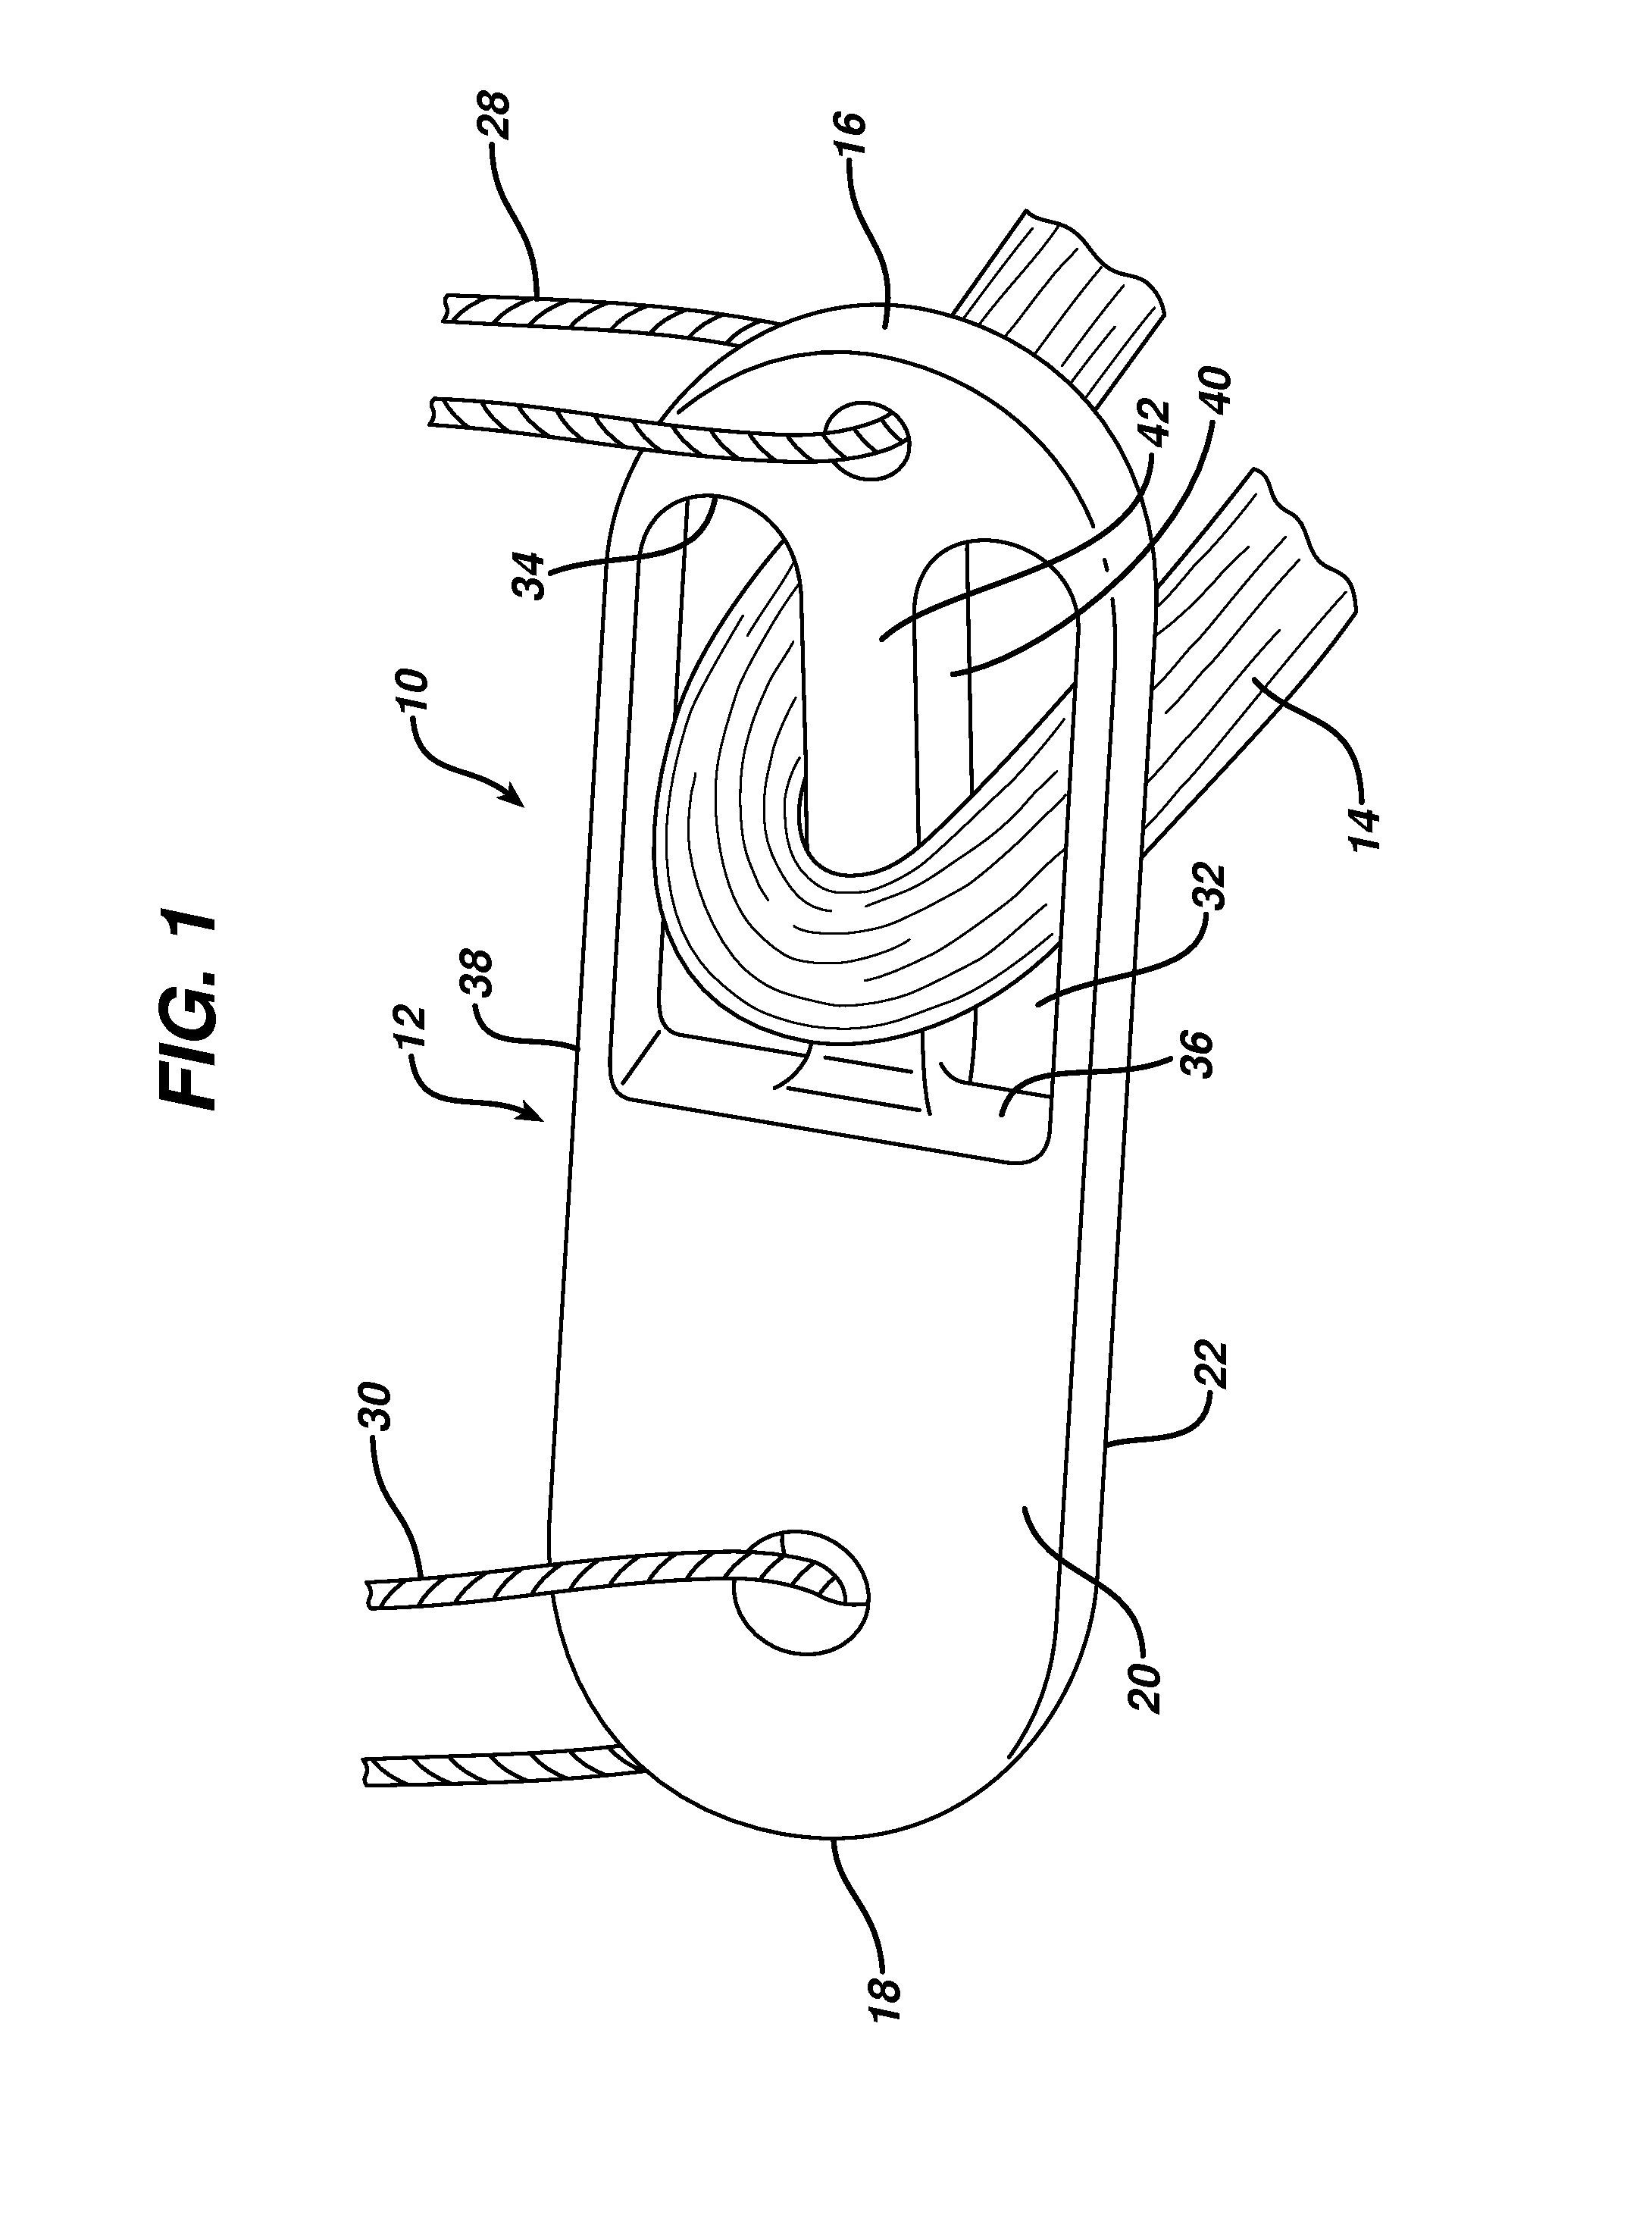 Flipping-type graft fixation device and method